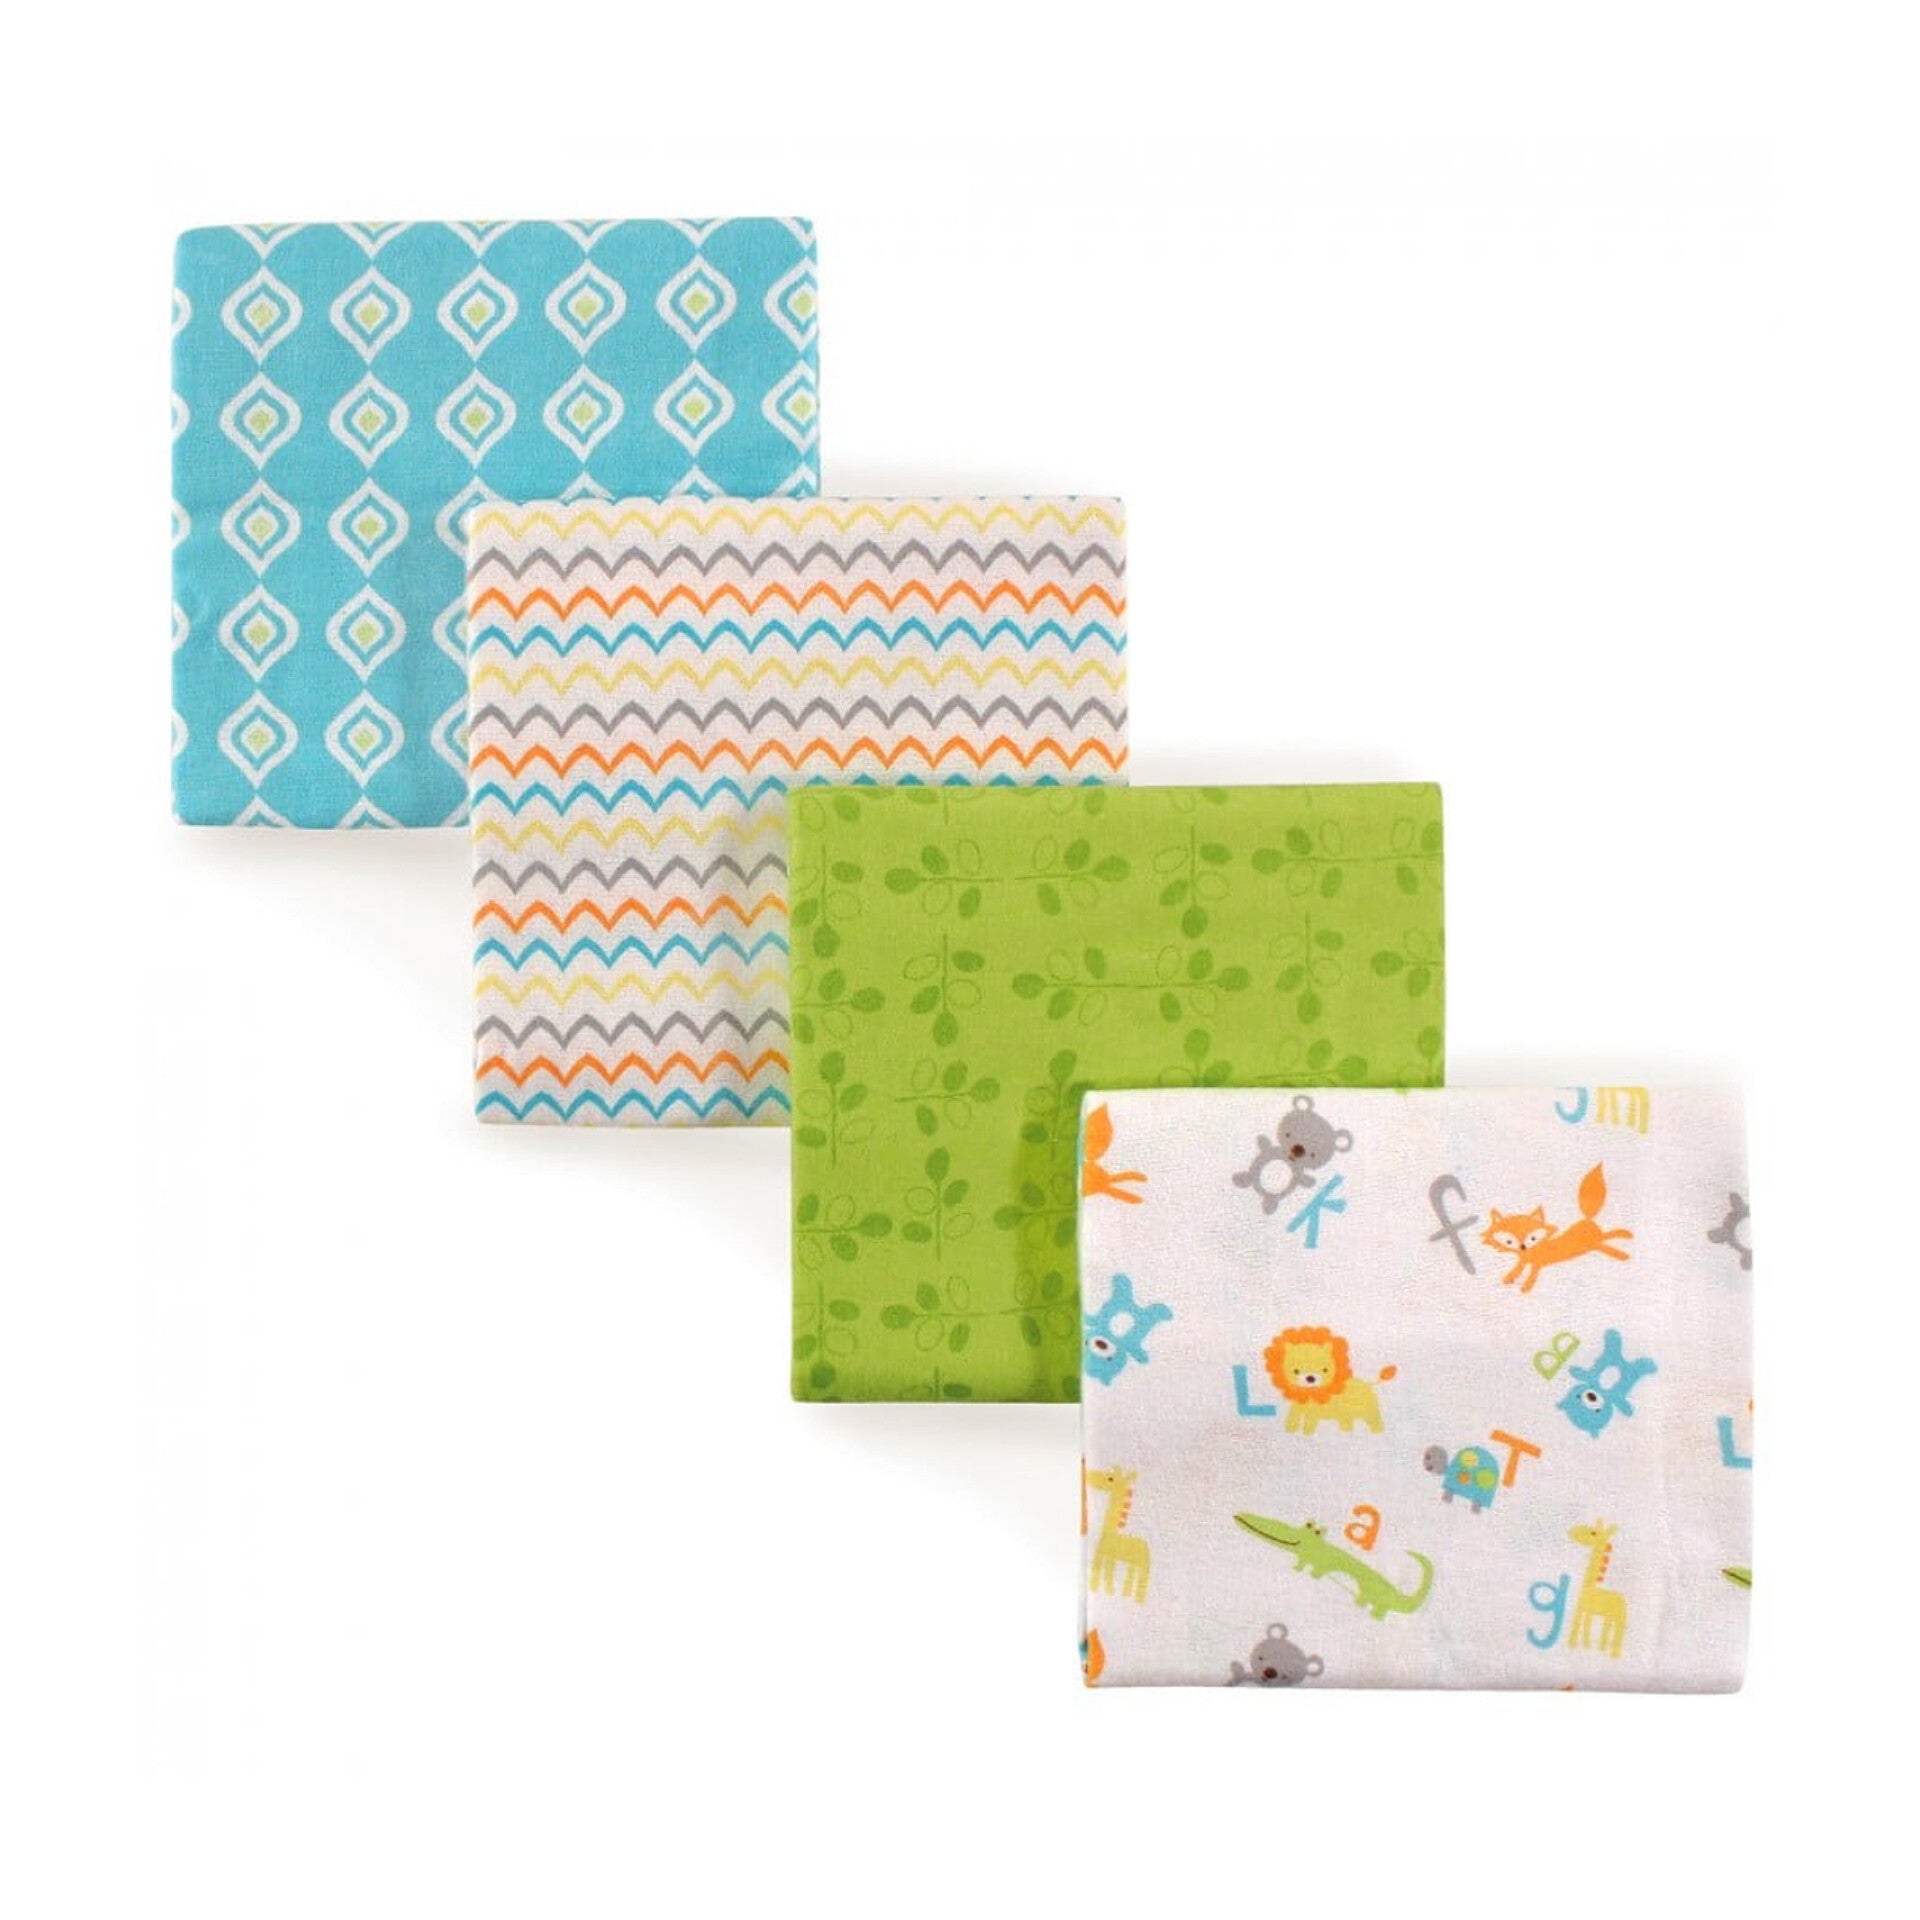 Luvable Friends Unisex Baby Cotton Flannel Receiving Blankets, Abc, One Size - Diaper Yard Gh